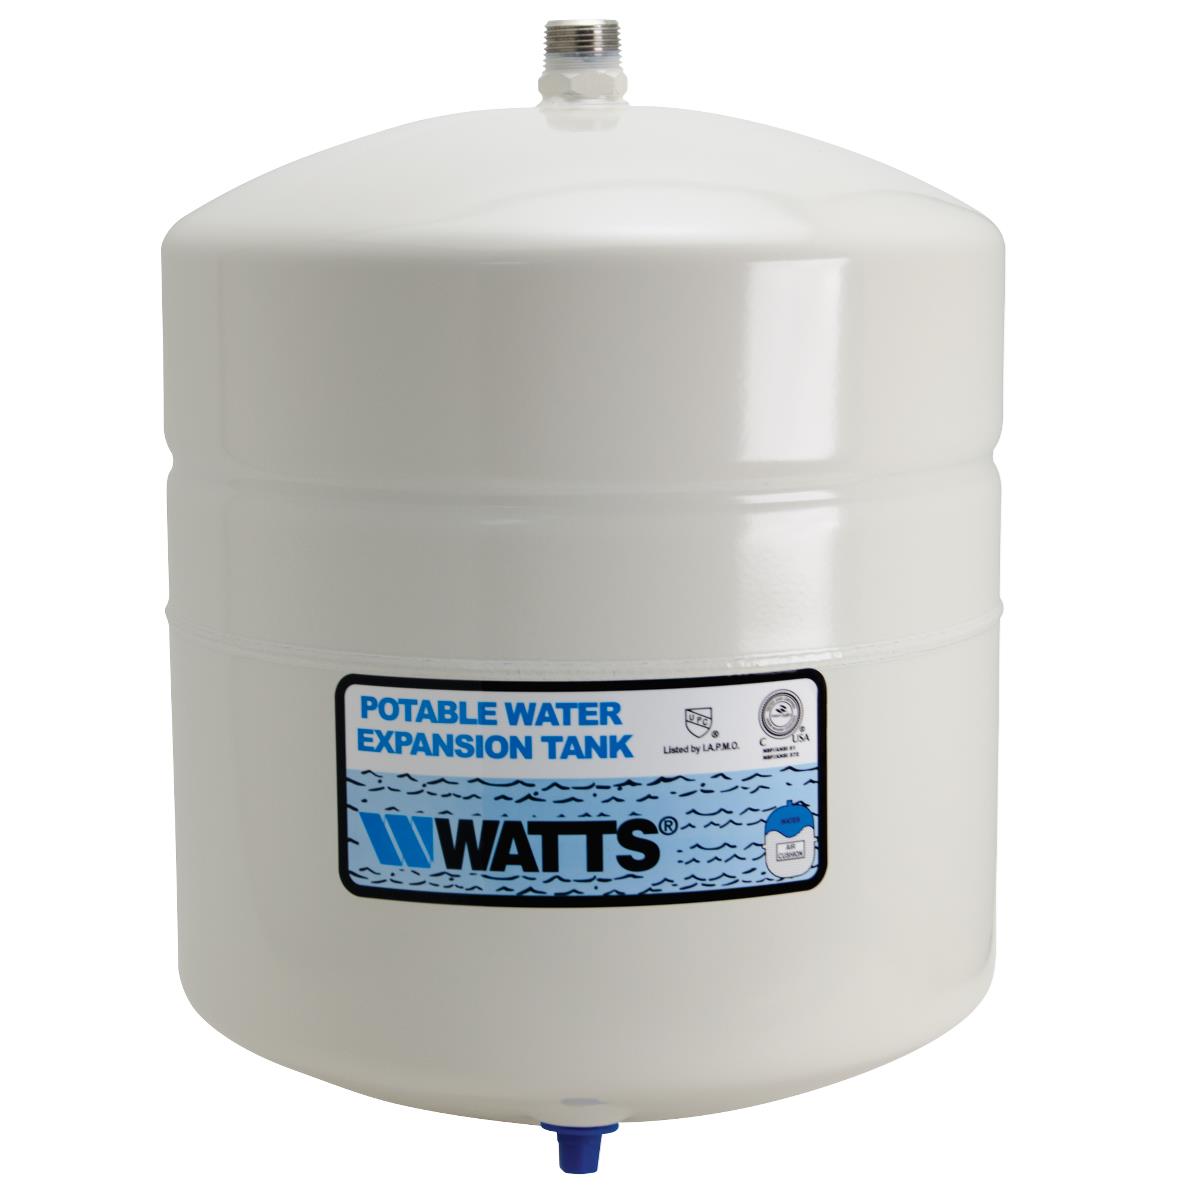 EXPANSION TANK FOR DOMESTIC / POTABLE WATER, WATER-HEATER,